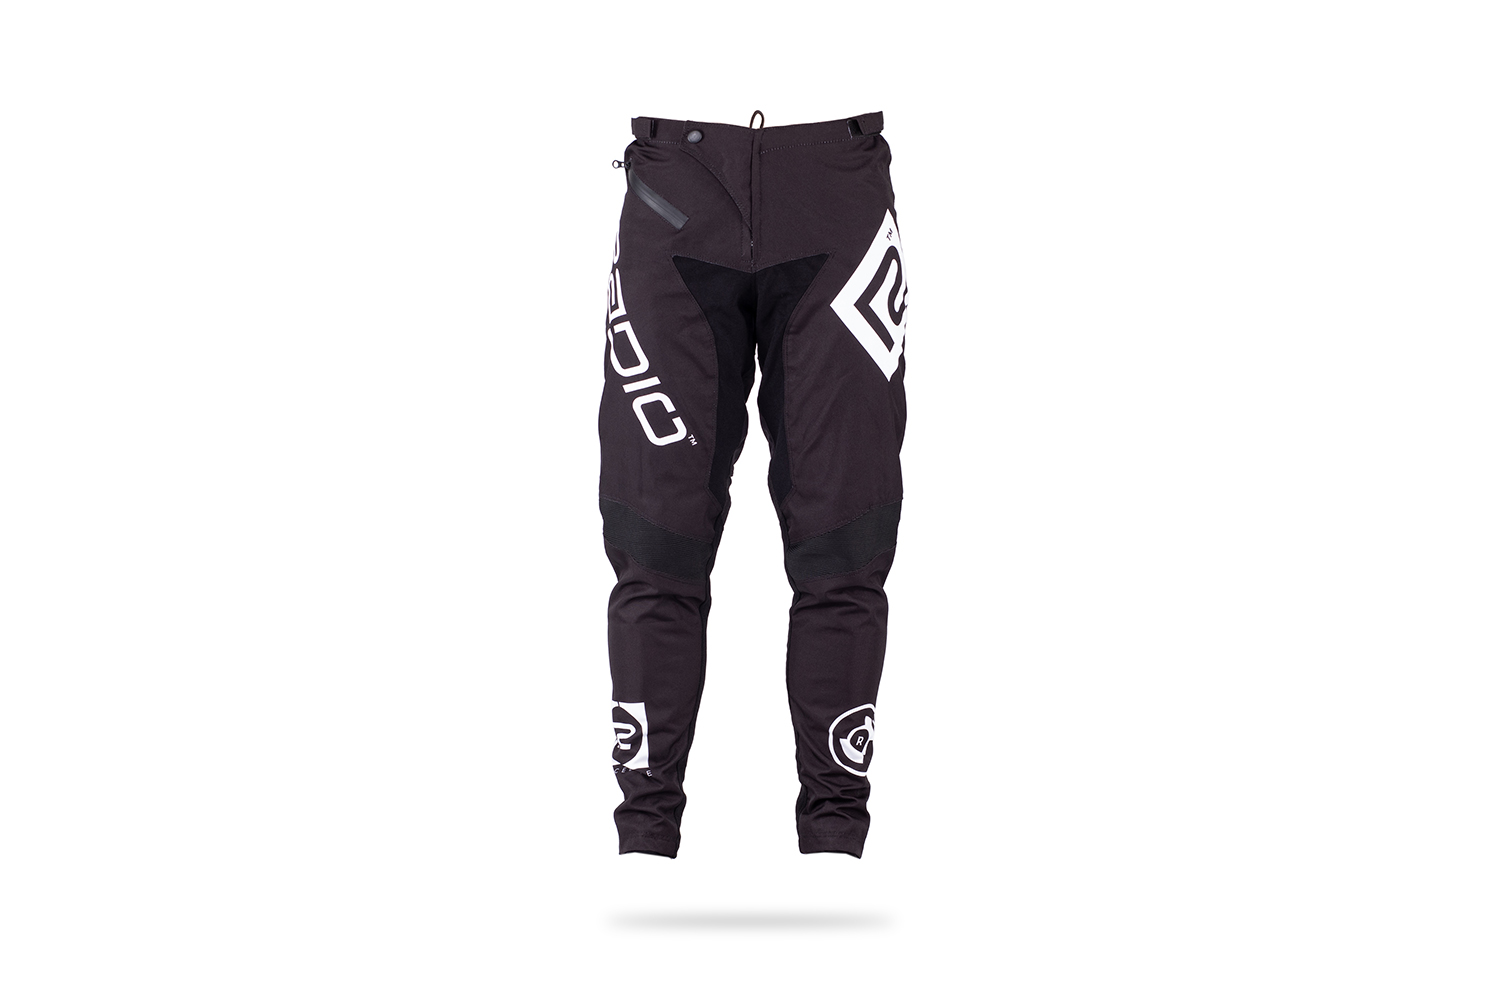 BMX pants Order yours online at Gear2win